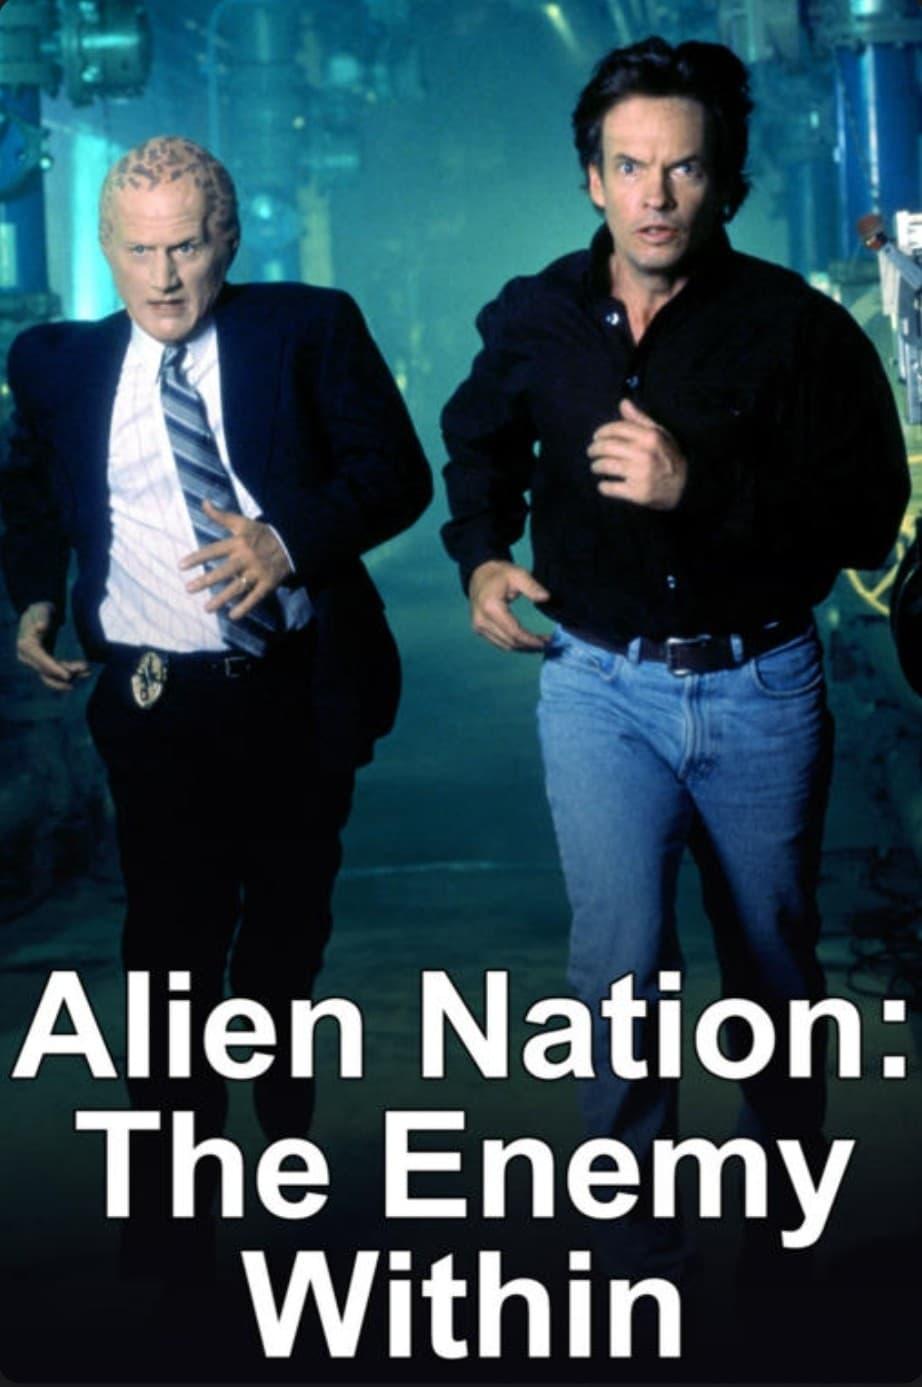 Alien Nation: The Enemy Within poster